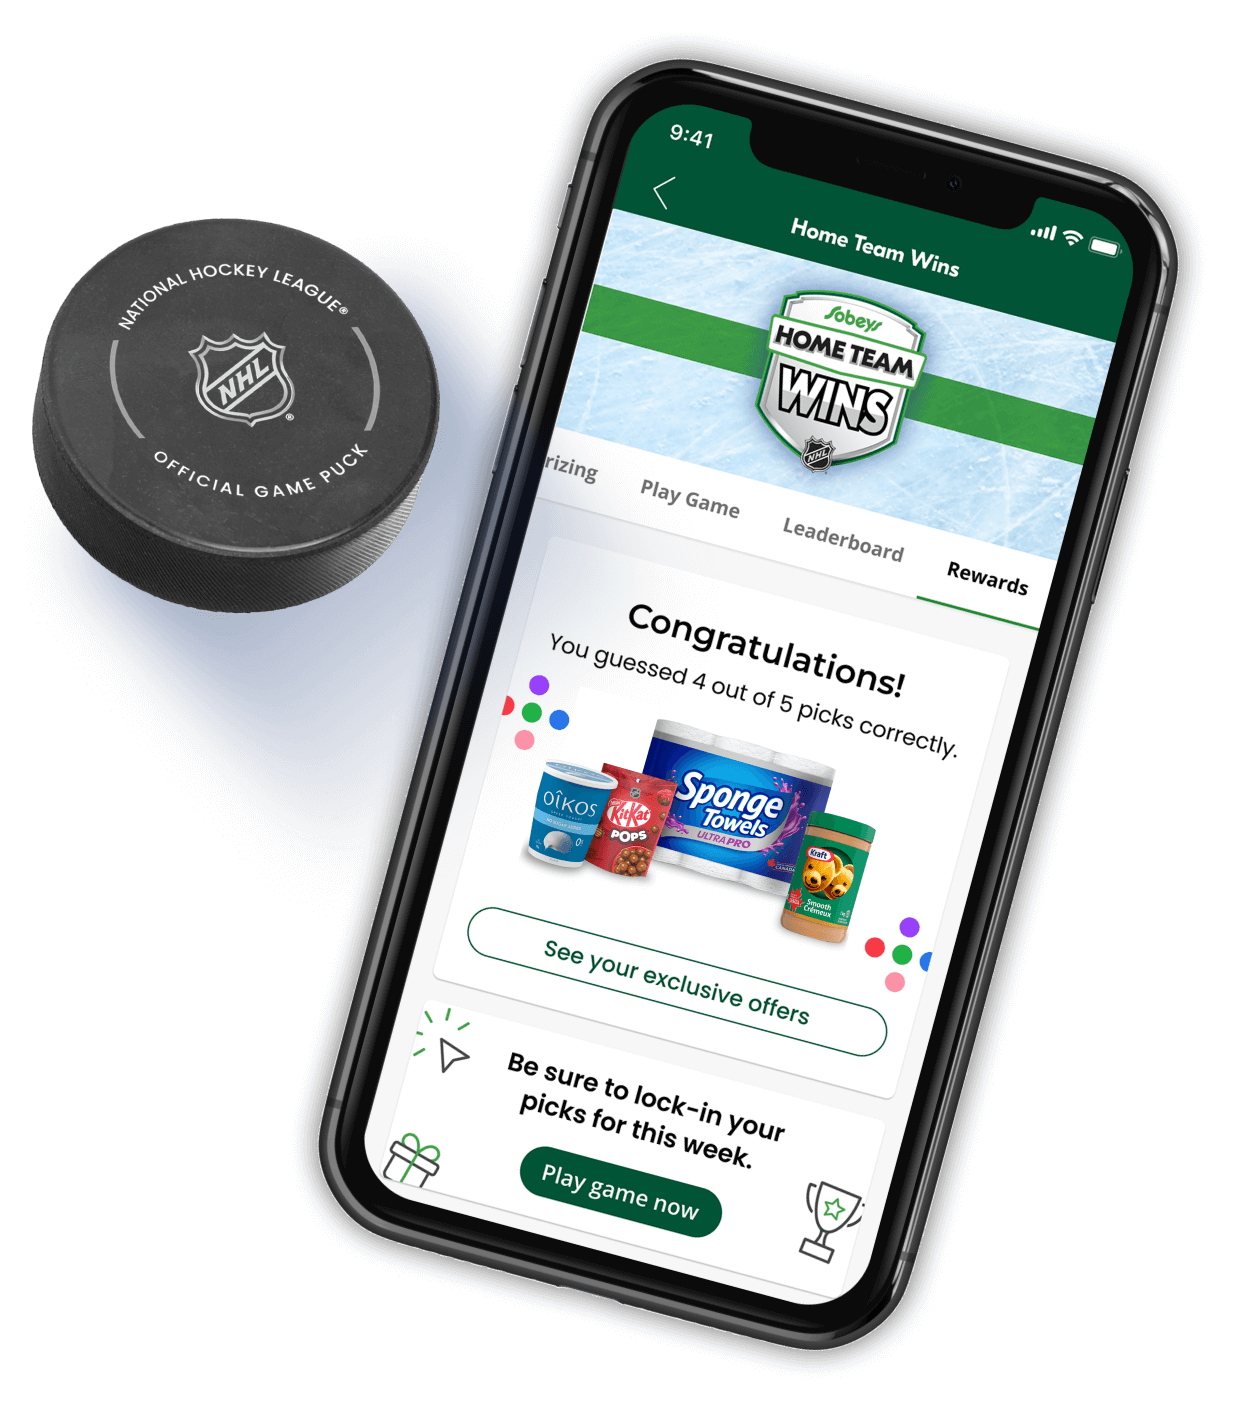 An image showing the Sobeys Home Team Wins Application running on a smartphone with a rewards section.